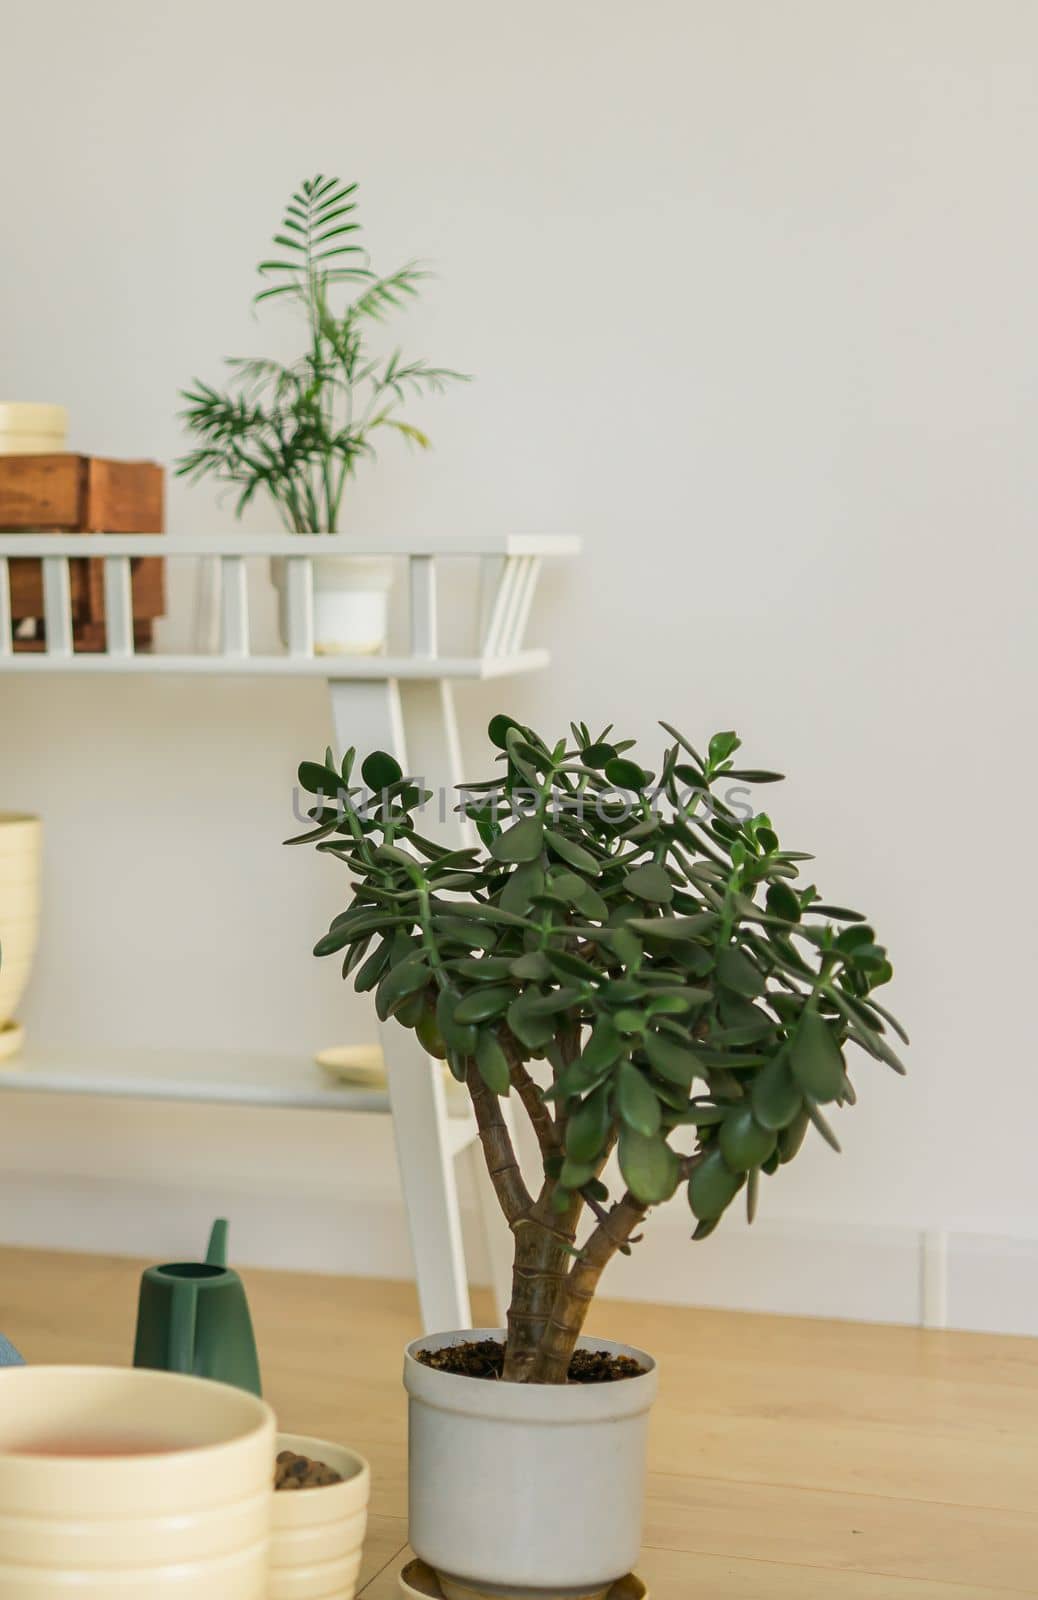 Houseplant Crassula jade plant money tree in white pot in home - home gardening concept by Satura86